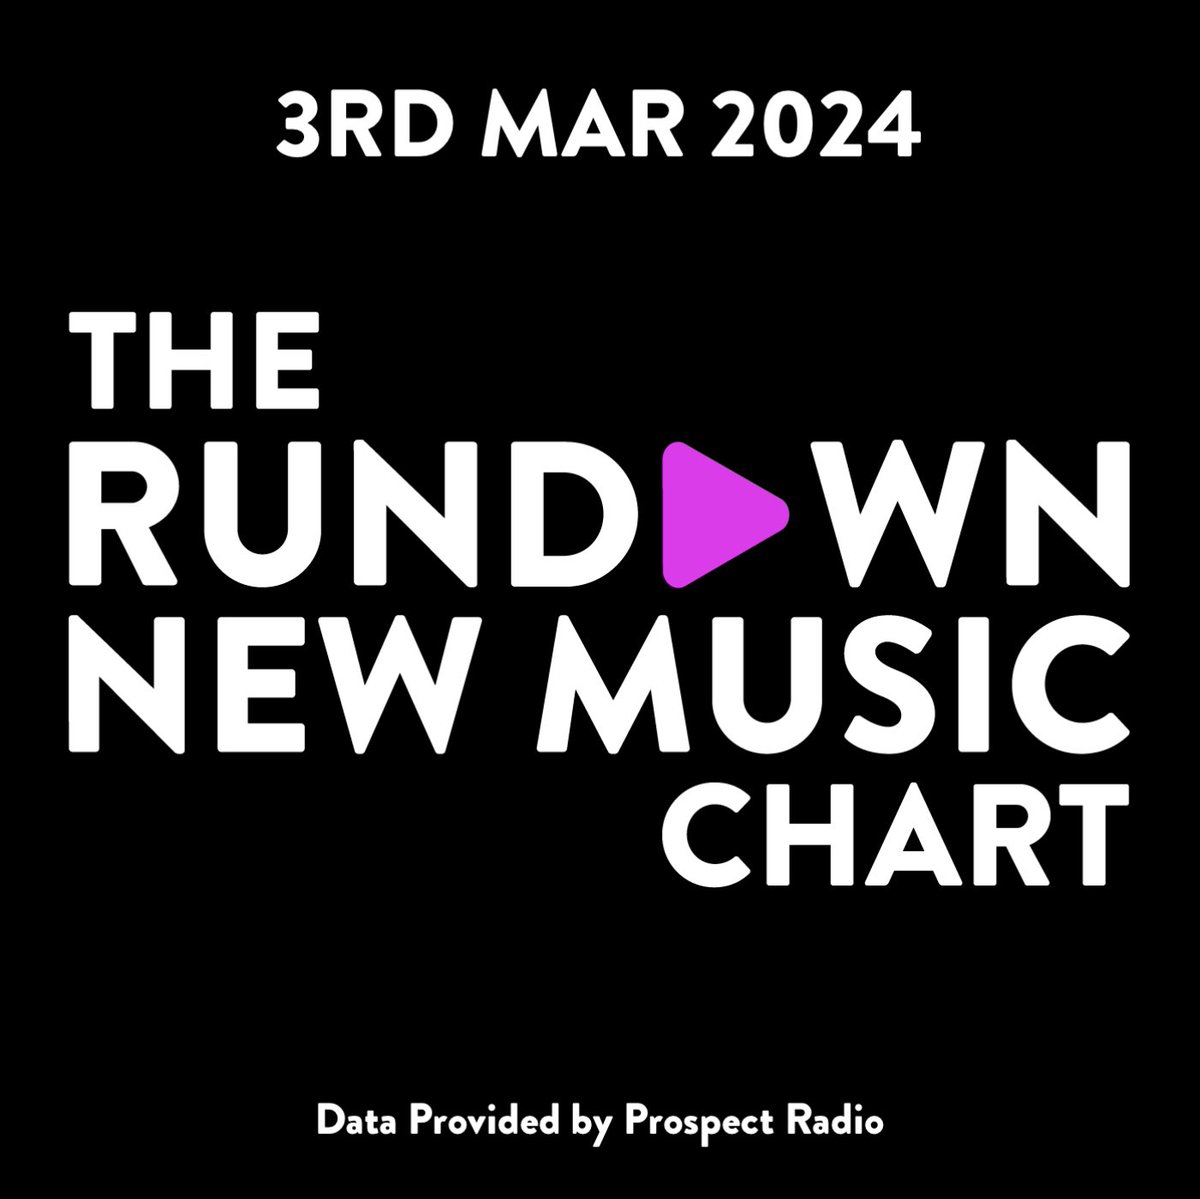 @ProspectRadio1 @Emma_Scott @superxsaurus @KirstieKraus @saibhskelly1 @samscherdel Latest chart is available now!! (Link in bio) additional music from Stereo Club, @housewife_band and @TheNotion_band